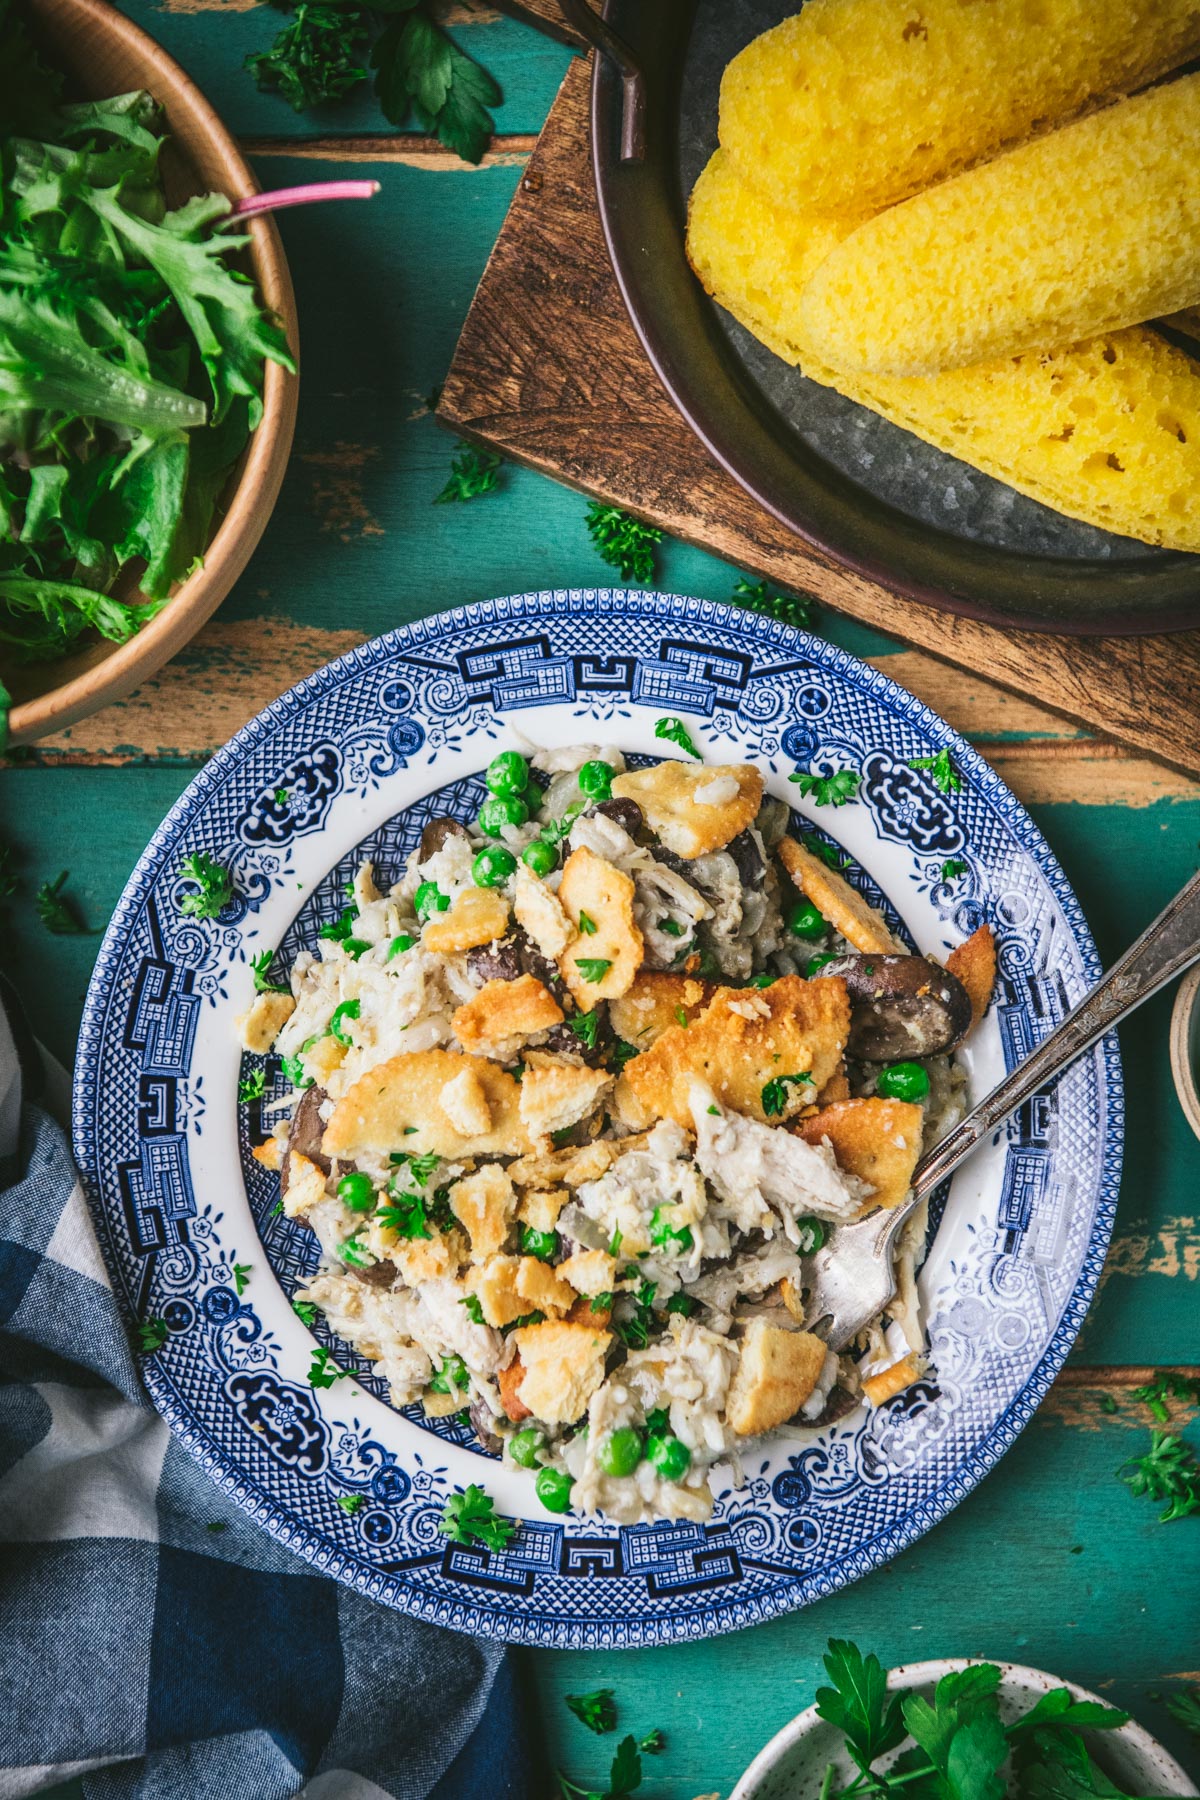 Chicken mushroom rice casserole on a blue and white plate.